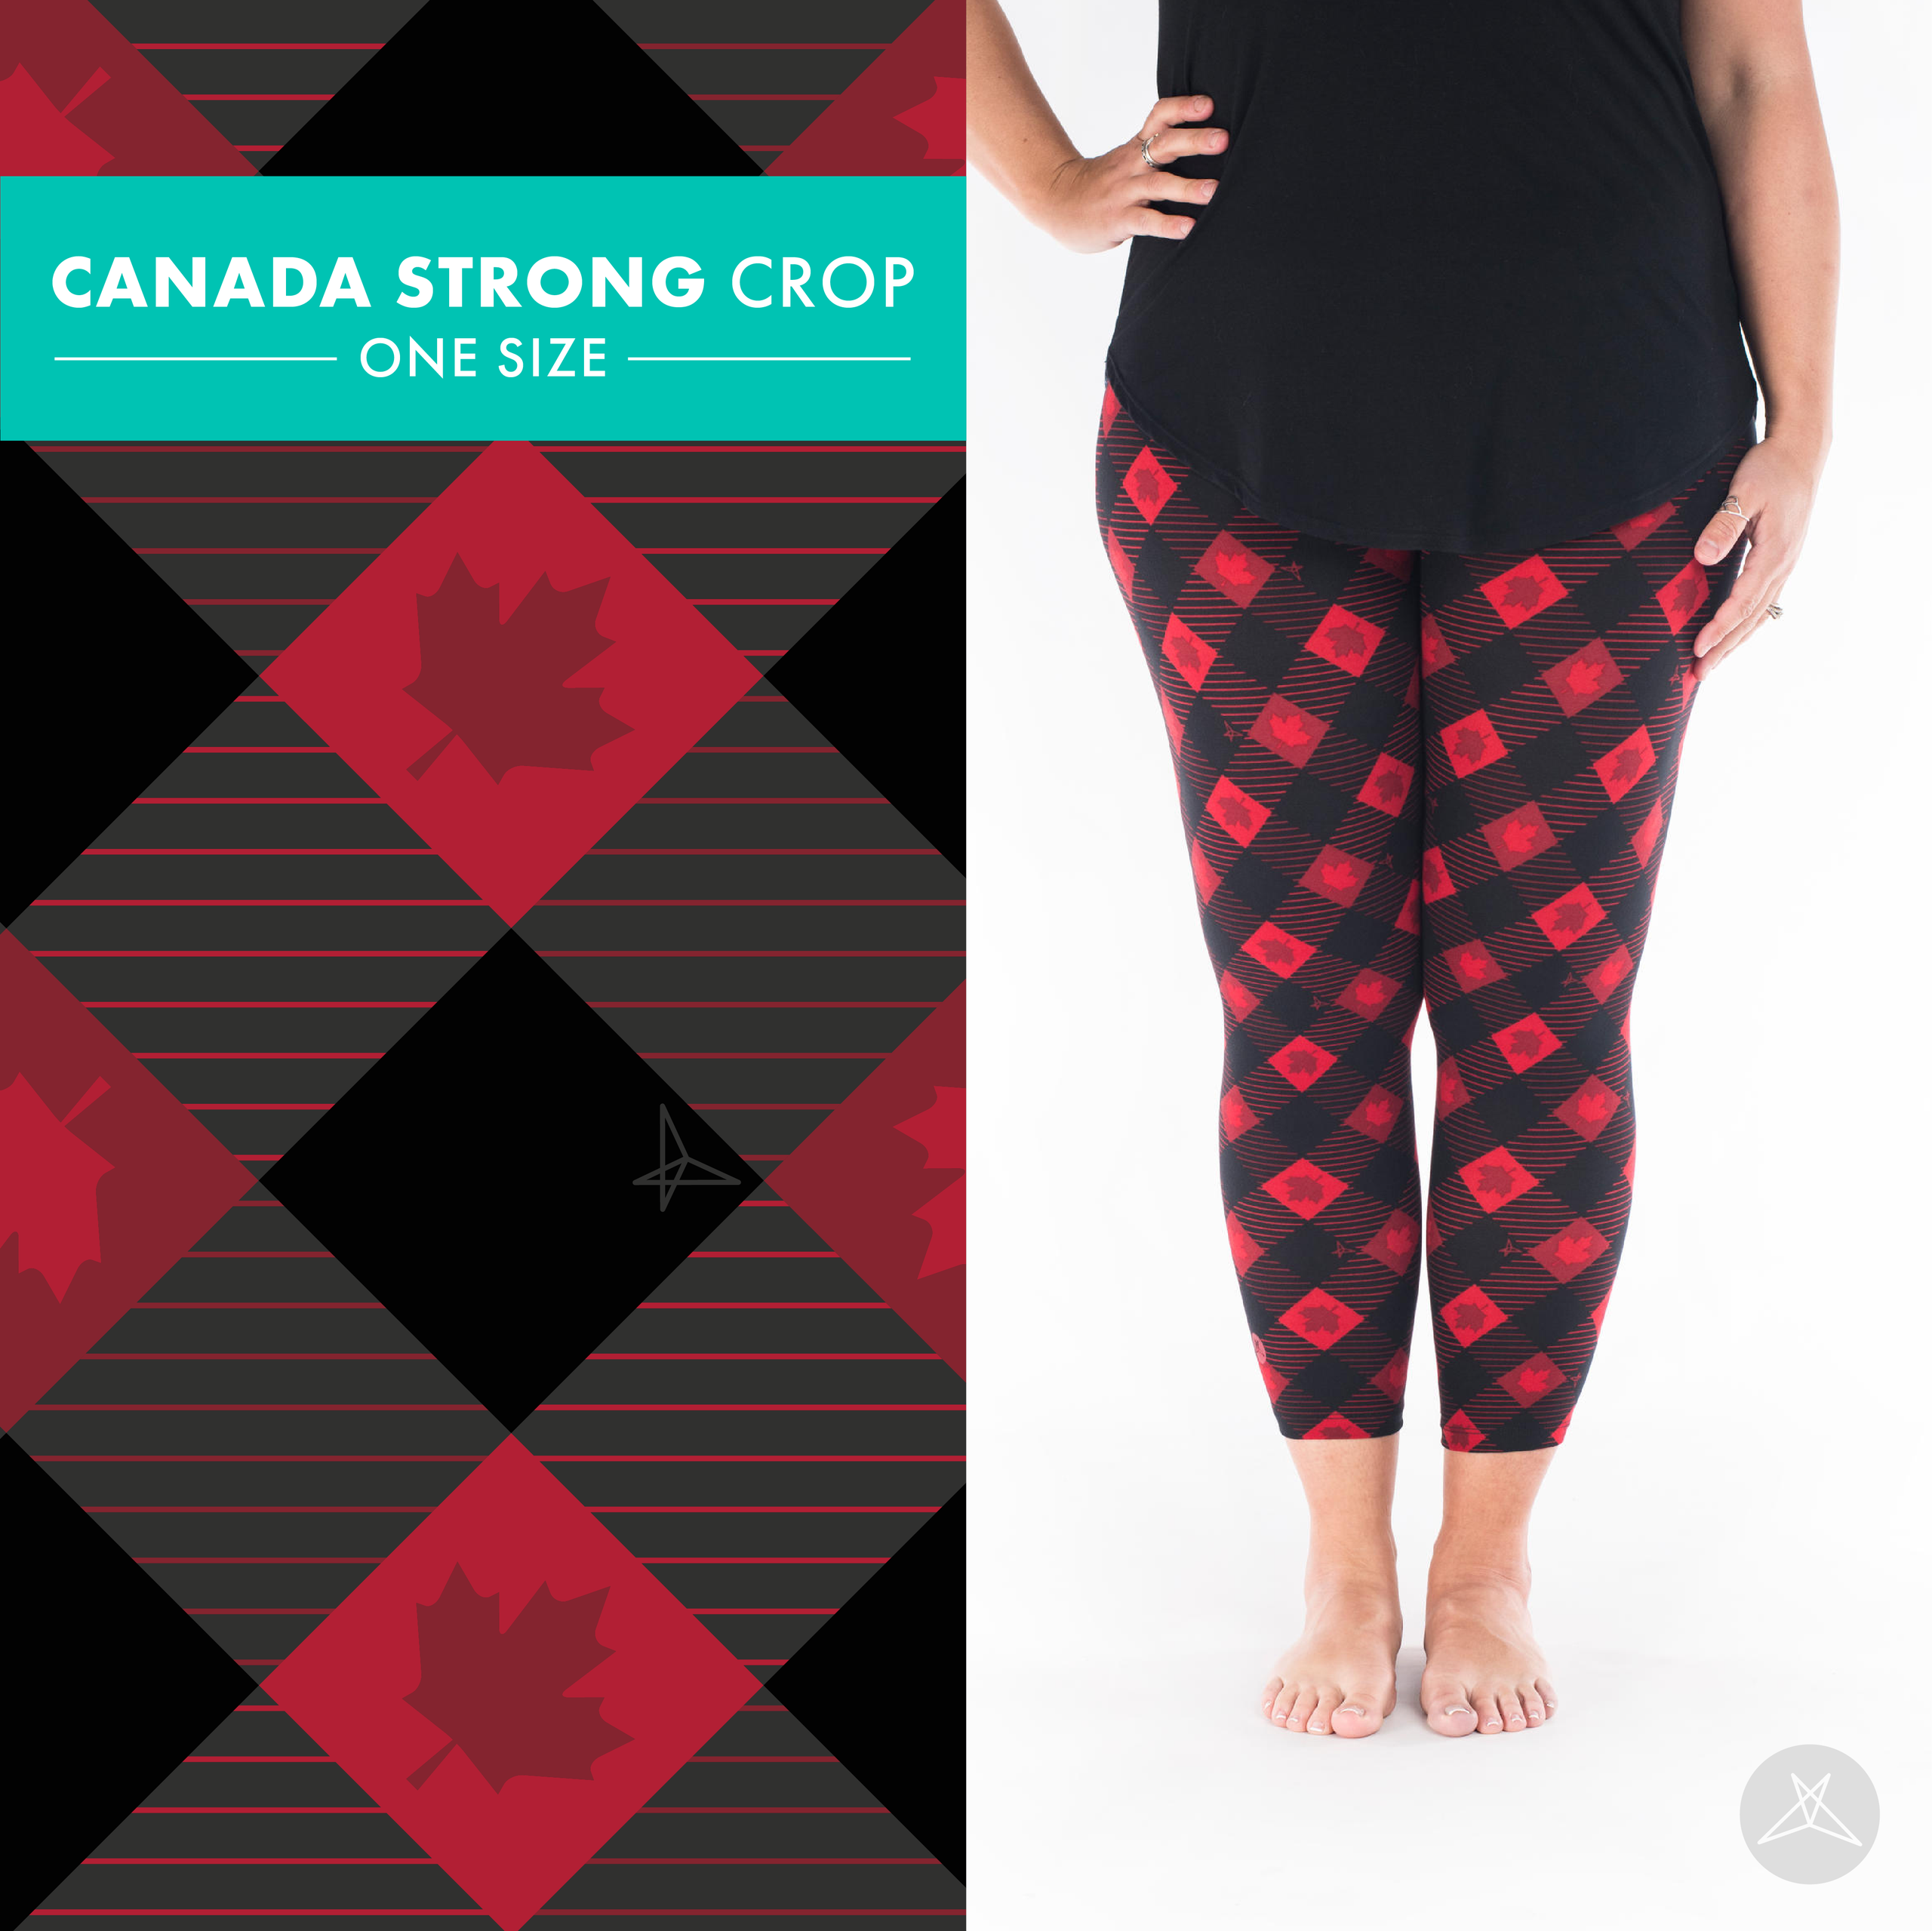 Canada Strong Crop - One Size  SweetLegs New Westminster with Nora